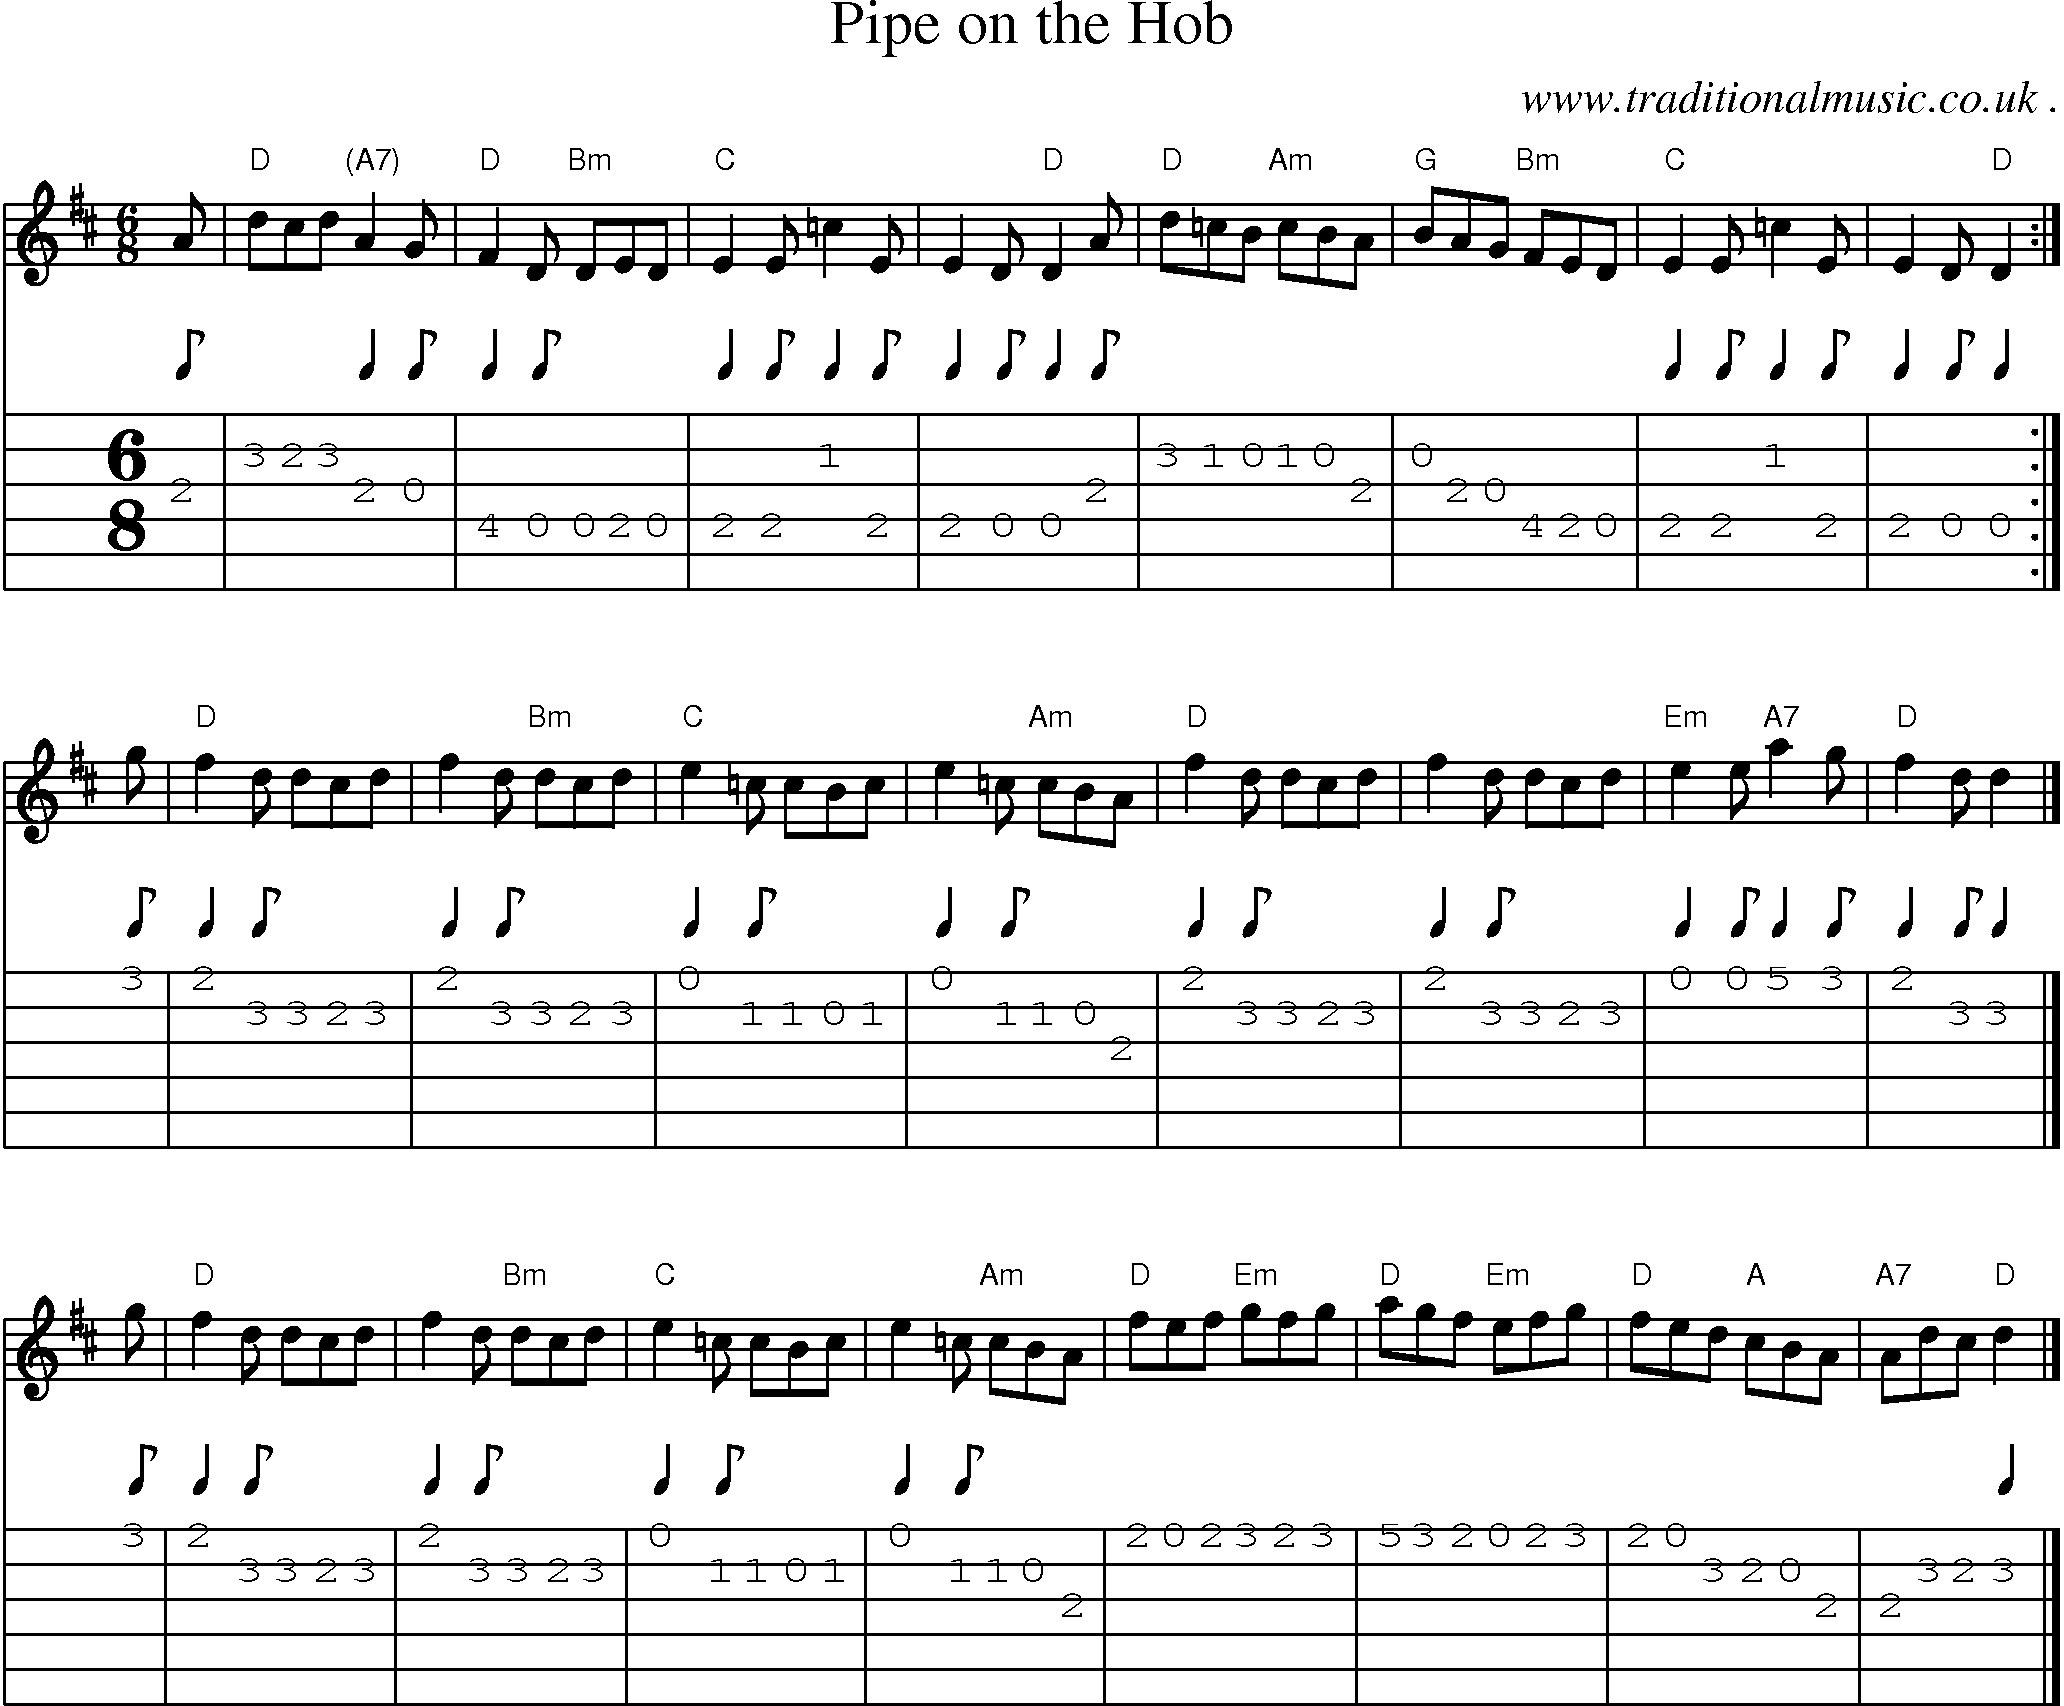 Sheet-music  score, Chords and Guitar Tabs for Pipe On The Hob